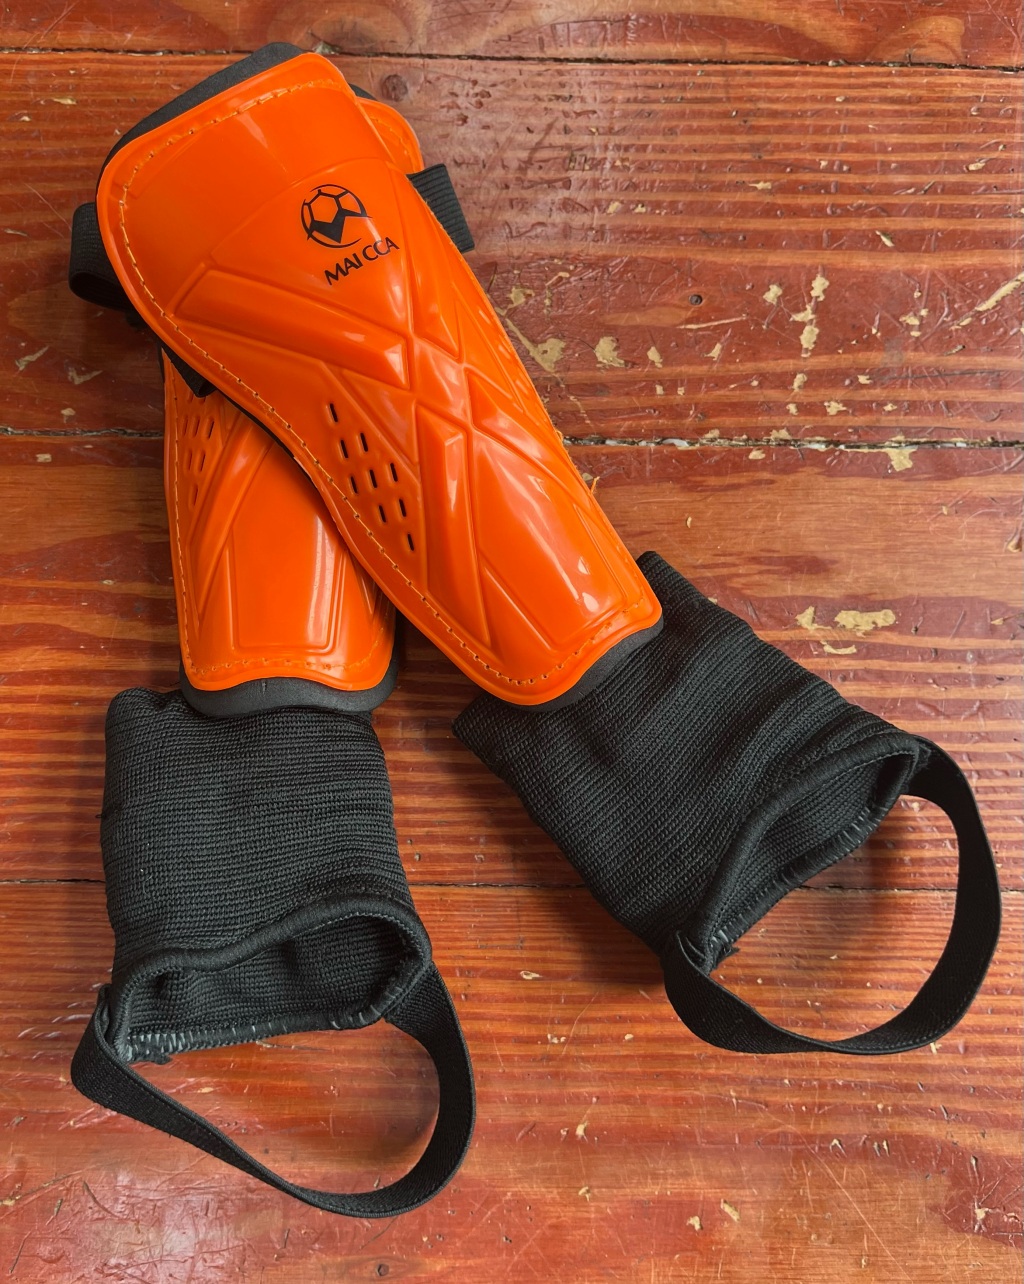 Outfun Youth Soccer Shin Guards on orange and black